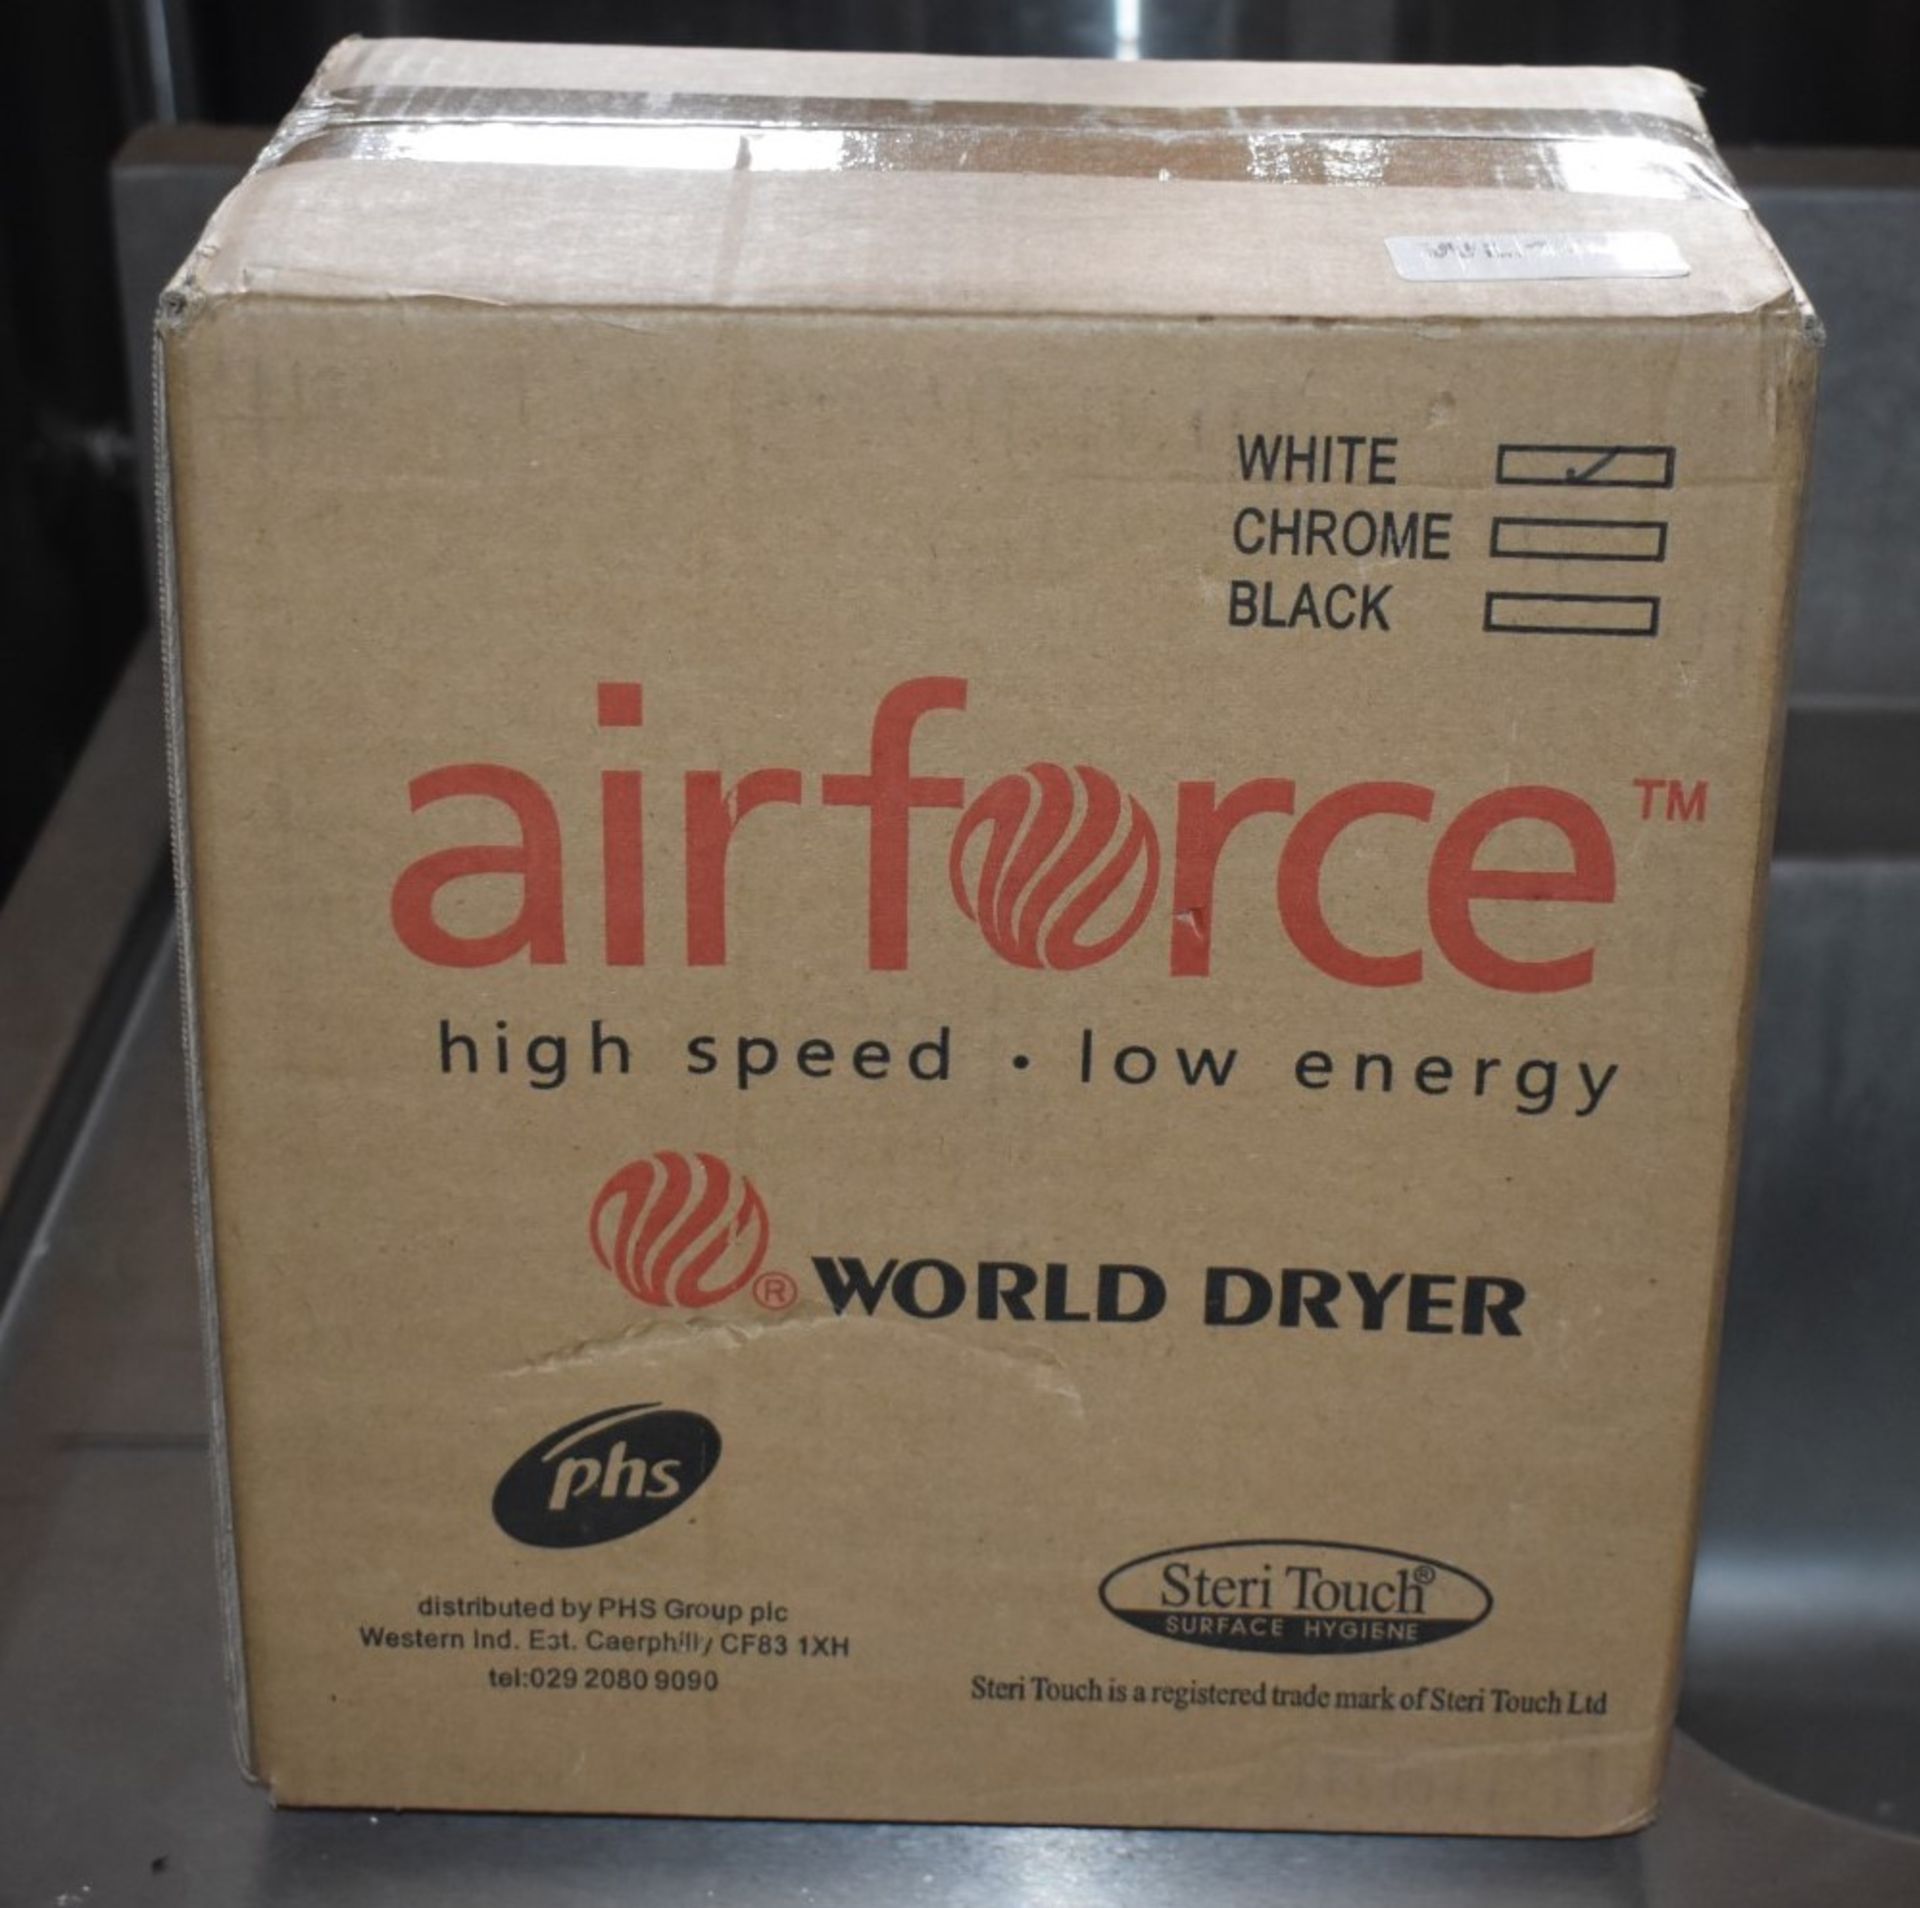 1 x Air Force High Speed Low Energy Electric Hand Dryer - Mode J48-974W3 - Brand New and Boxed - - Image 2 of 7